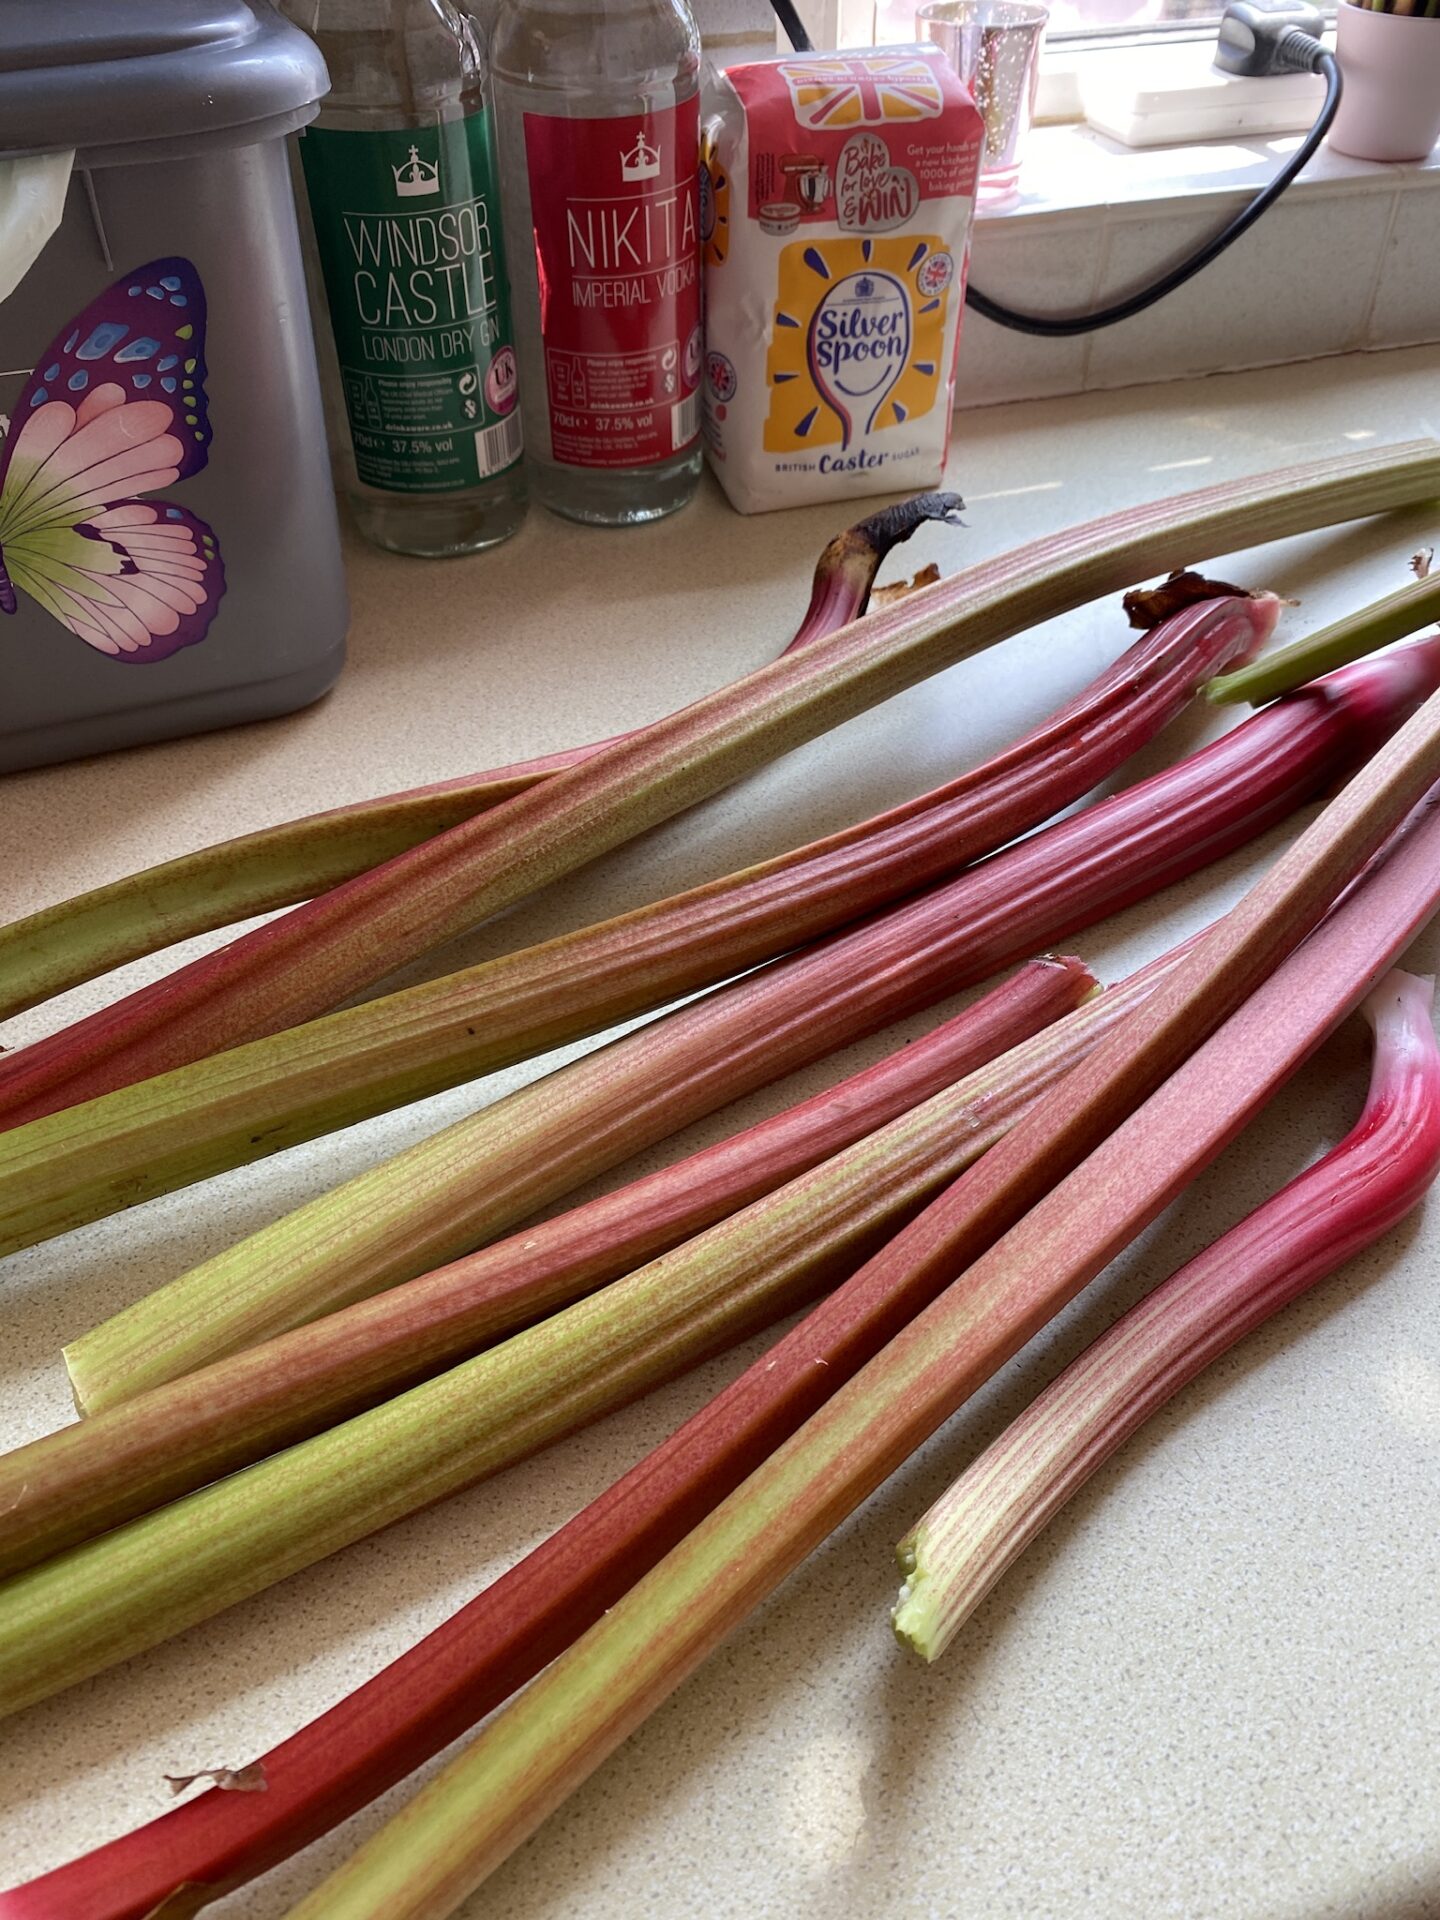 WHAT TO DO WITH THE RHUBARB?